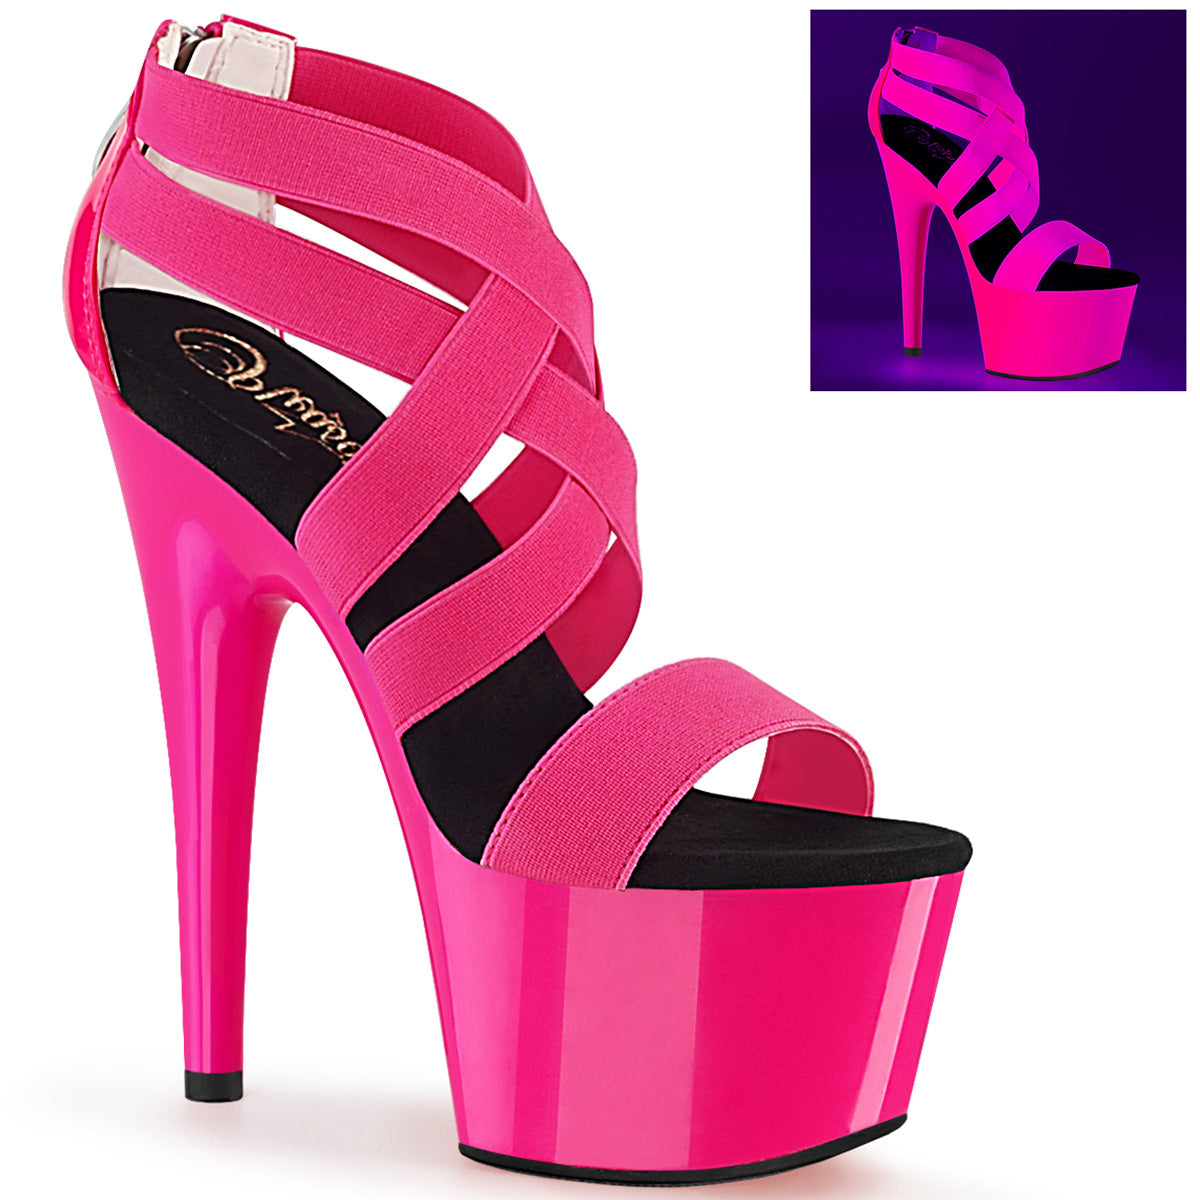 ADORE-769UV Sexy 7 Inch Heel Neon Hot Pink Pole Dancer Shoes